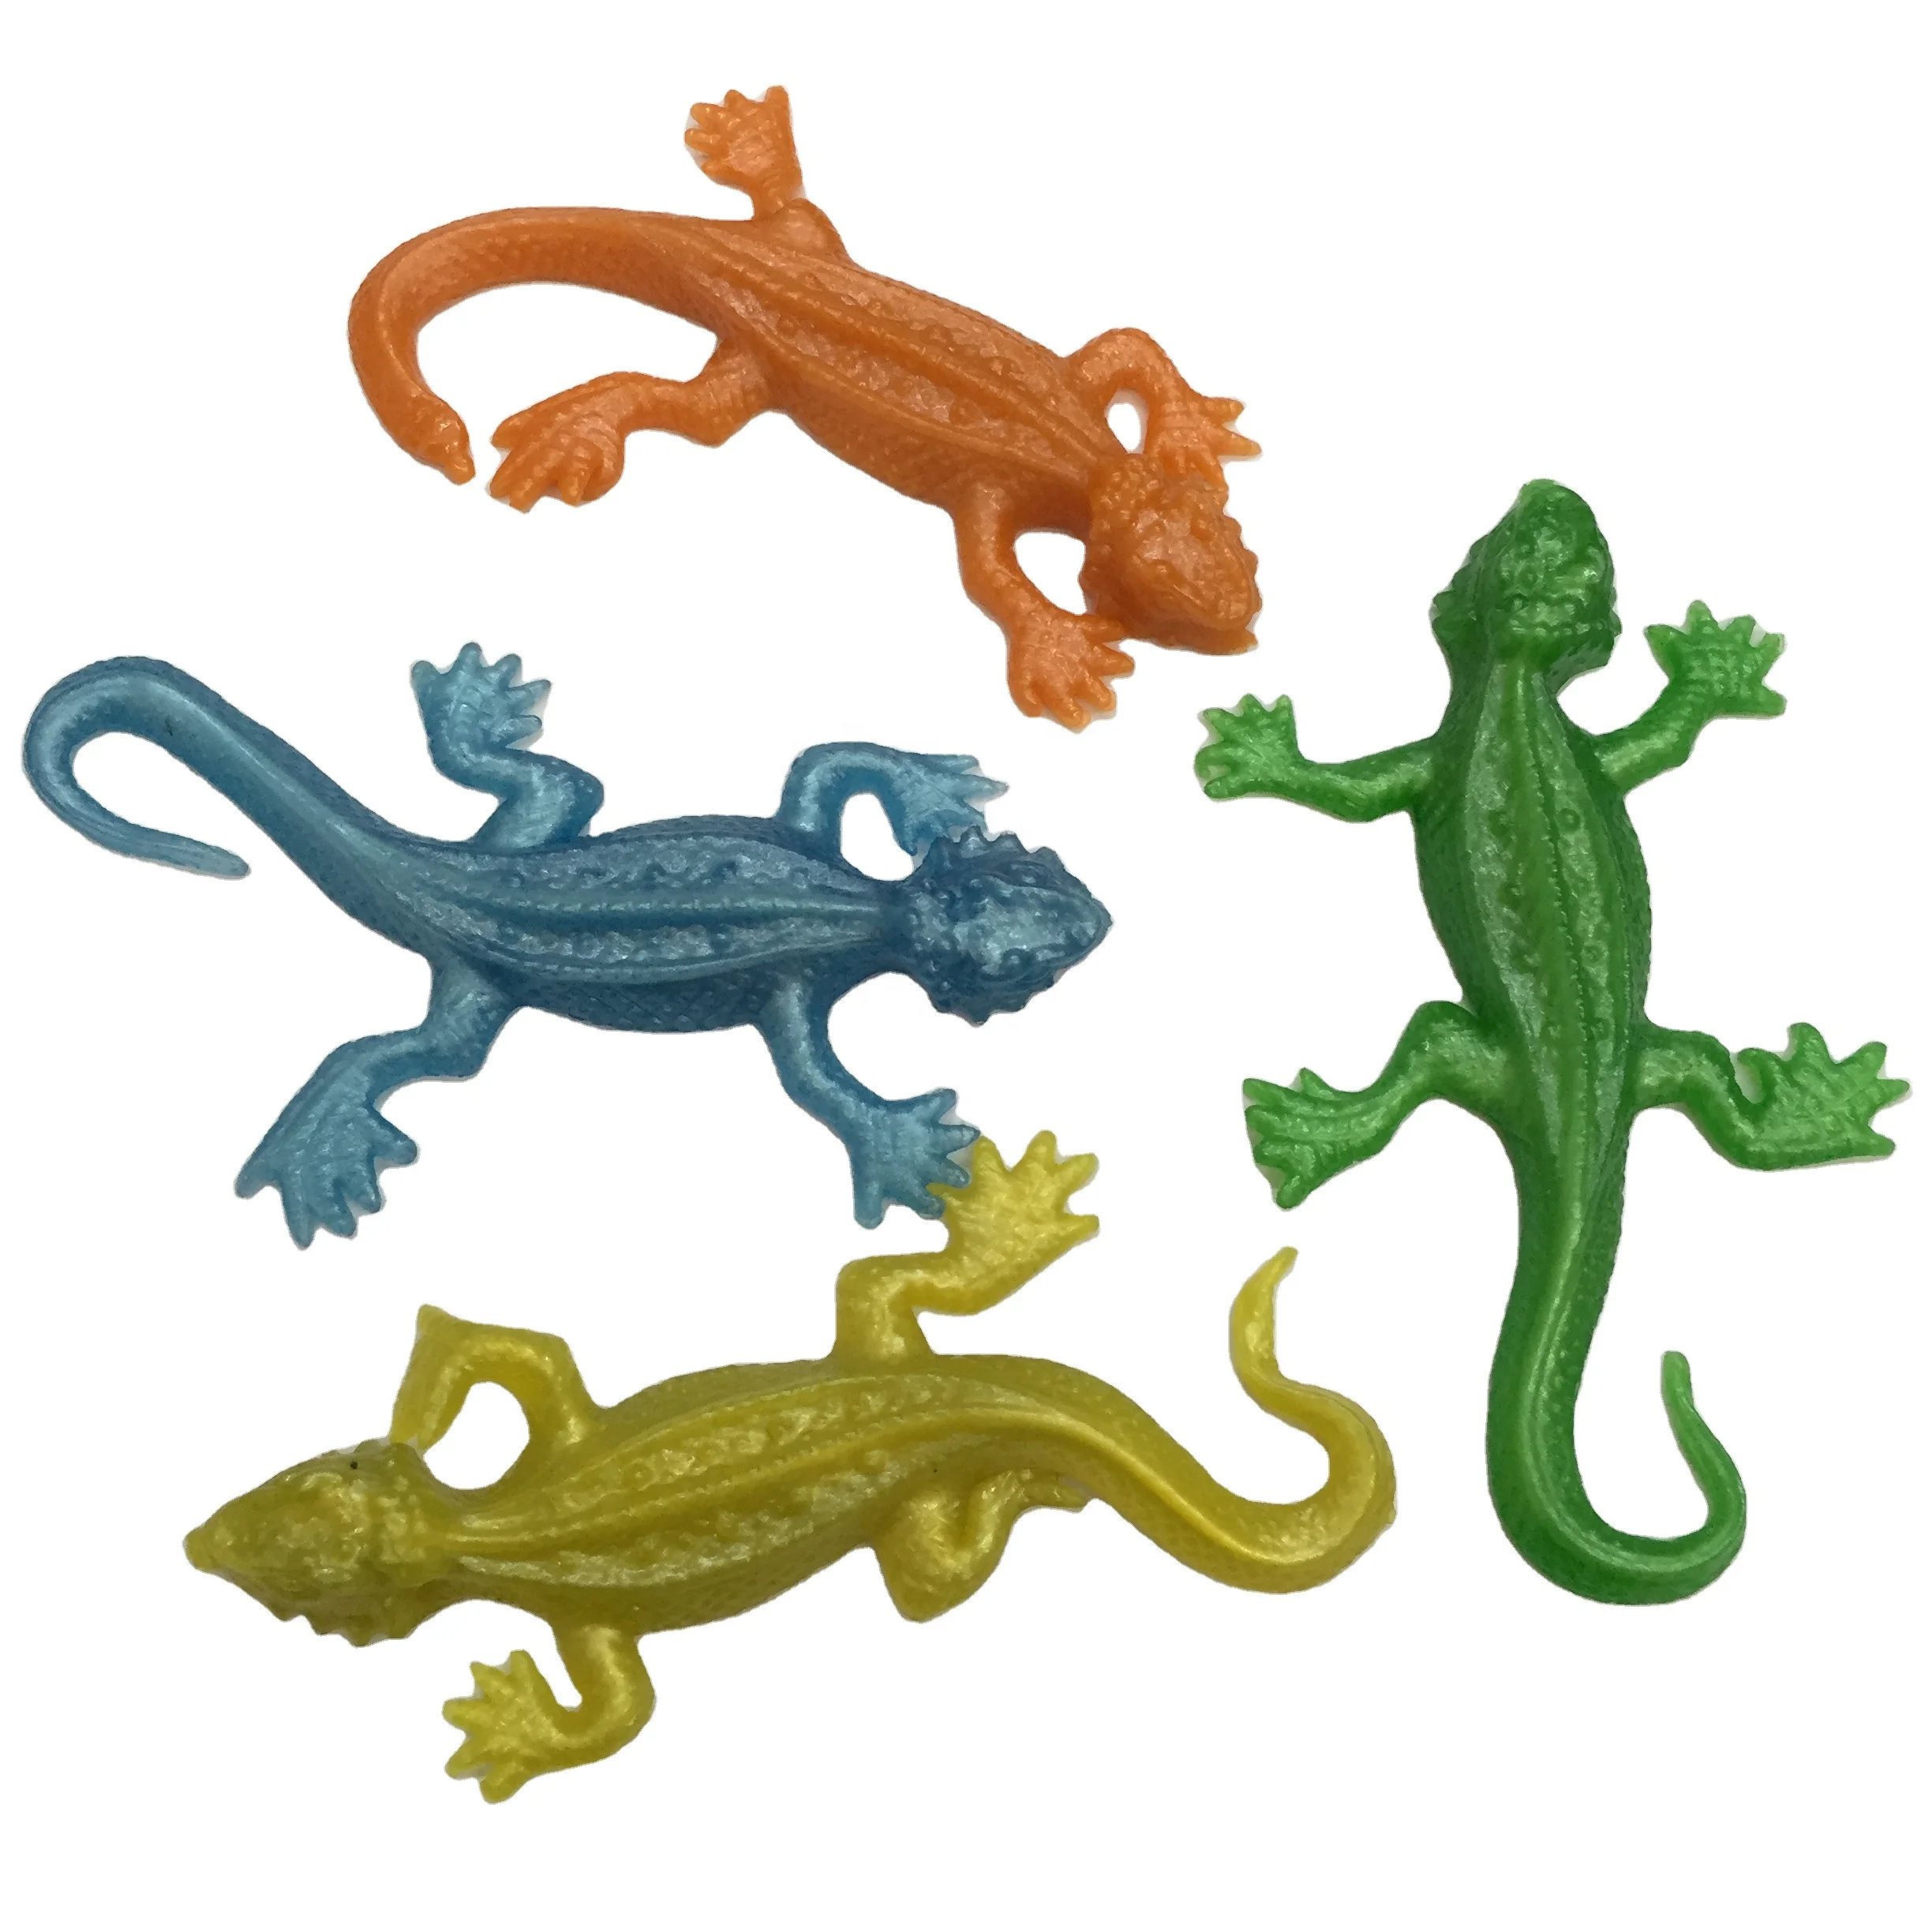 Sticky Stretchy lizards toys for children's party